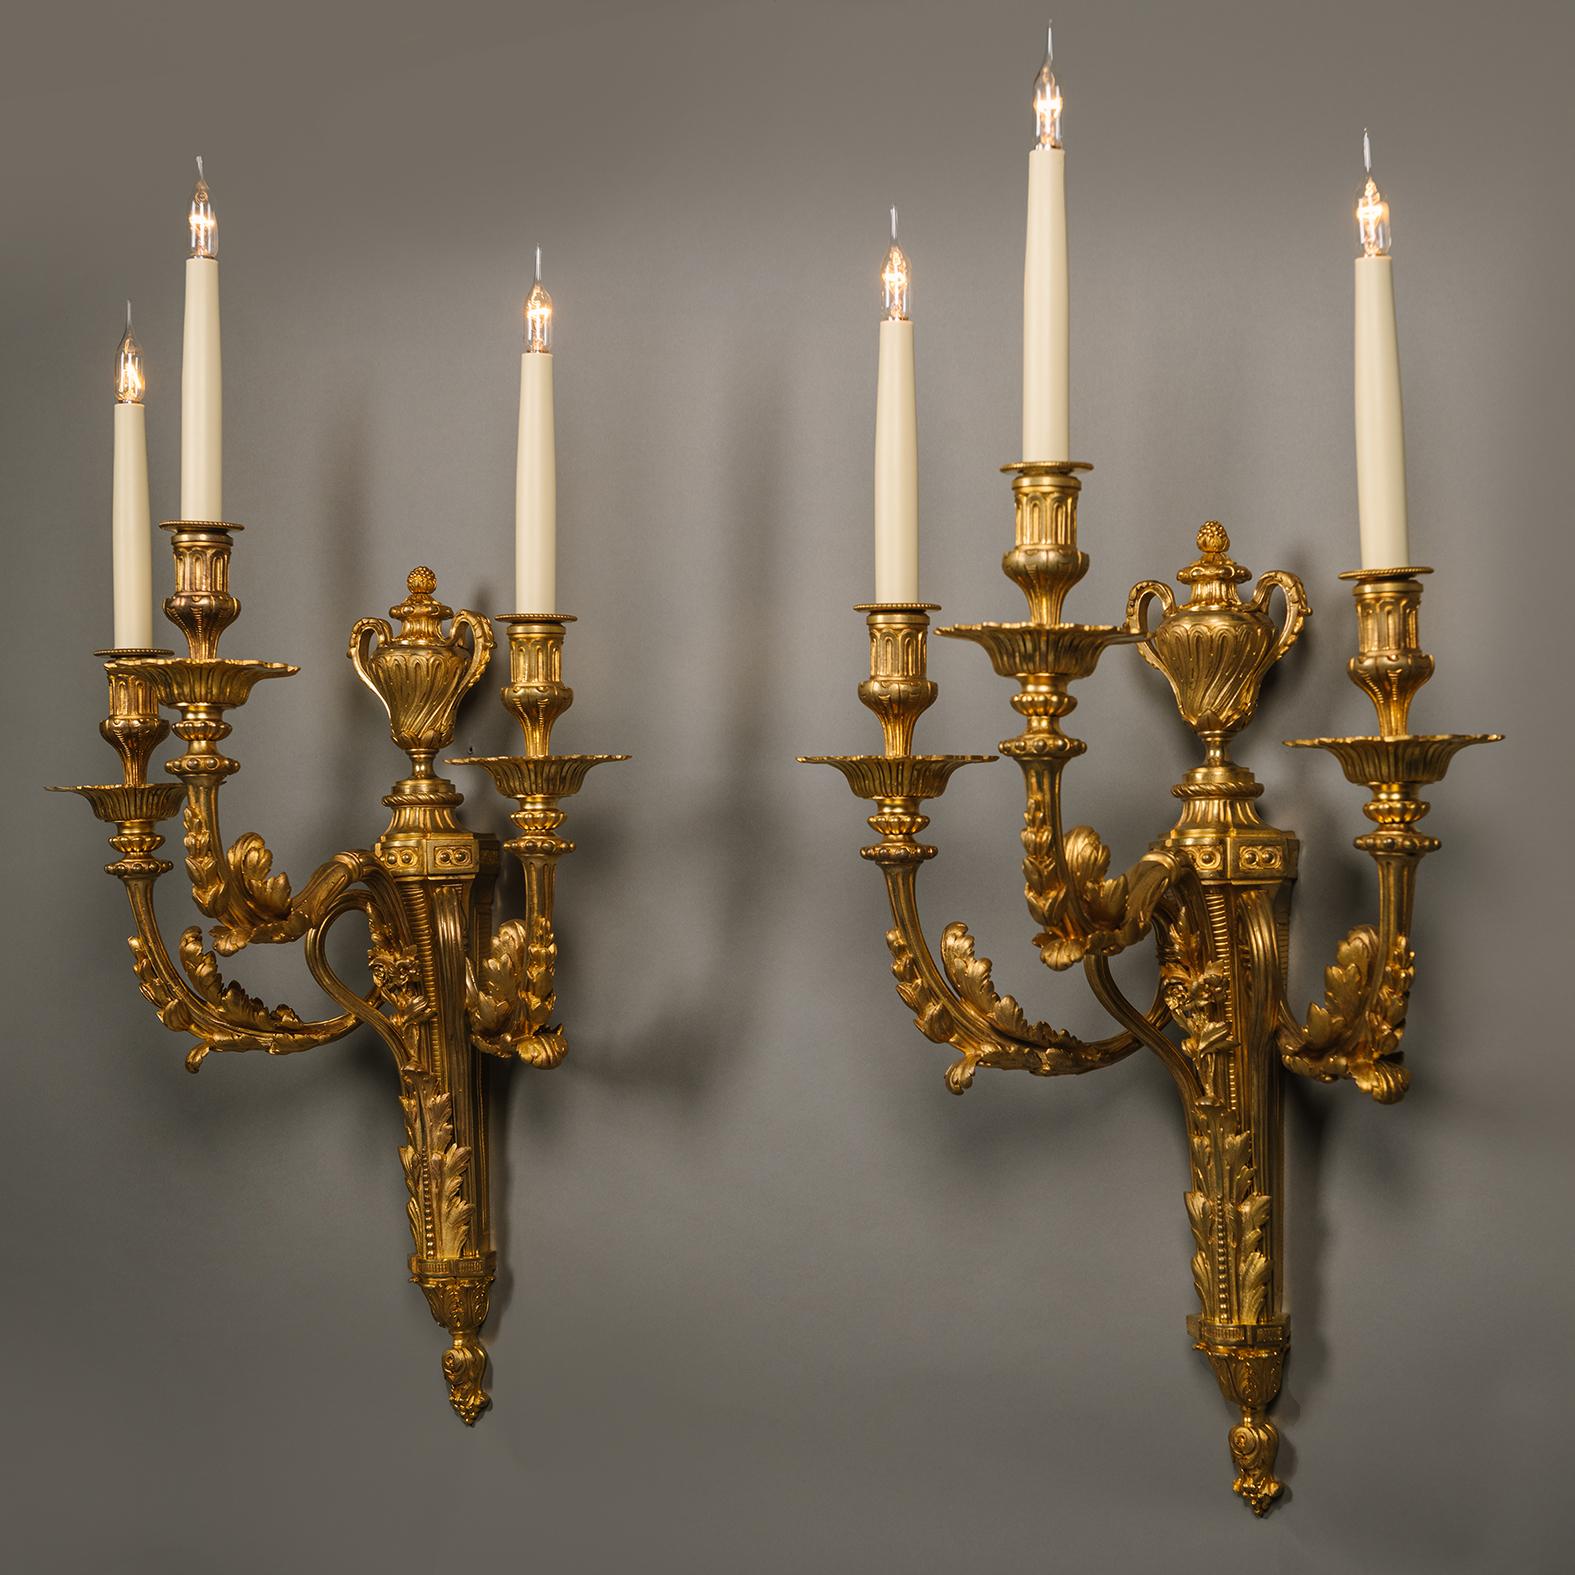 A Pair of Louis XVI Style Gilt-Bronze Three-Light Wall-Appliques. 

Each with tapering backplate in the shape of an arrow quiver and surmounted by an urn. Issuing three 'S'-scrolled acanthus wrapped branches terminating in fluted nozzles. Fitted for